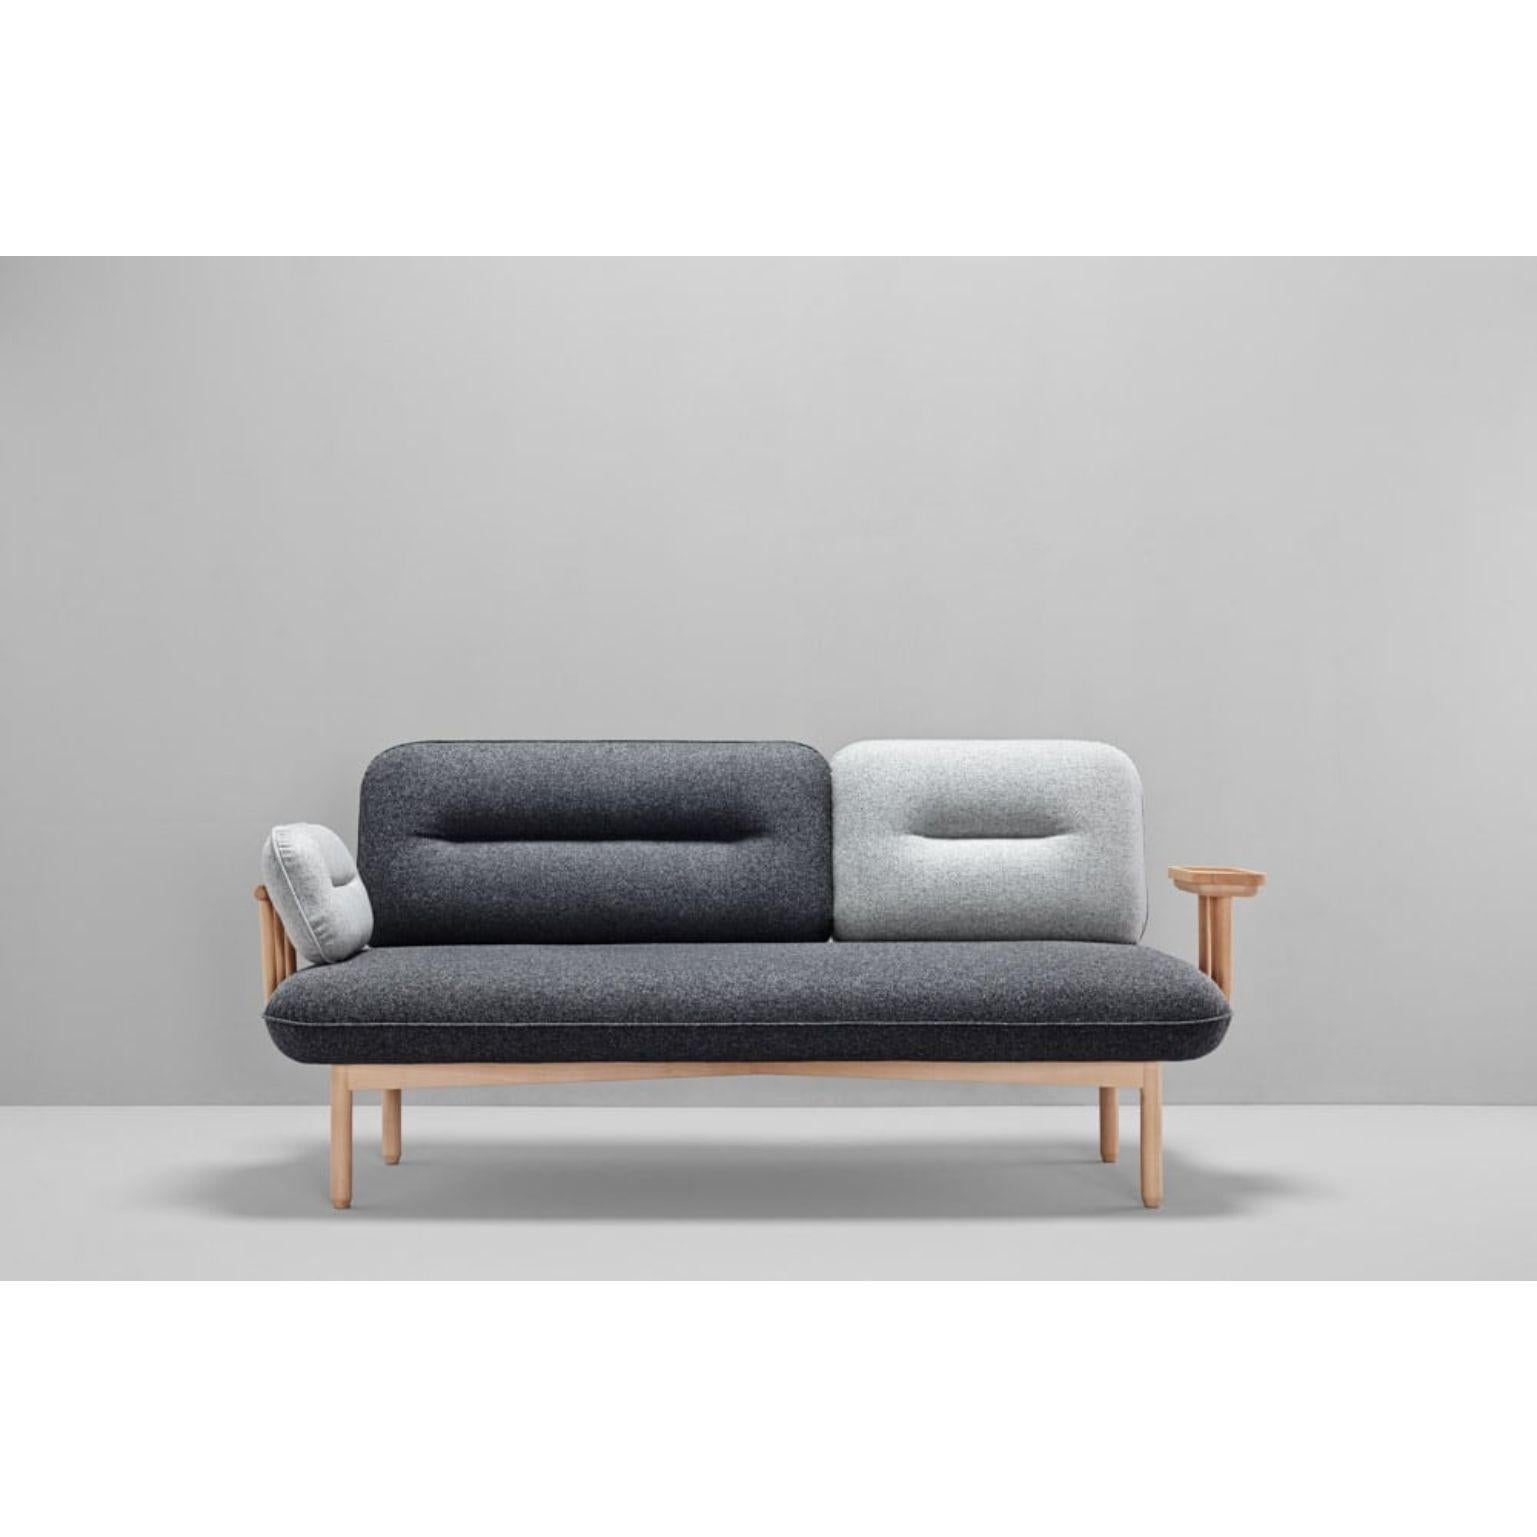 Gray cosmo sofa by La Selva
Dimensions: W 195, D 85, H 85, Seat45
Materials:Pine and beech wood structure reinforced with plywood
Arms and backrest frame treated with the steam bending technique
Foam CMHR (high resilience and flame retardant)